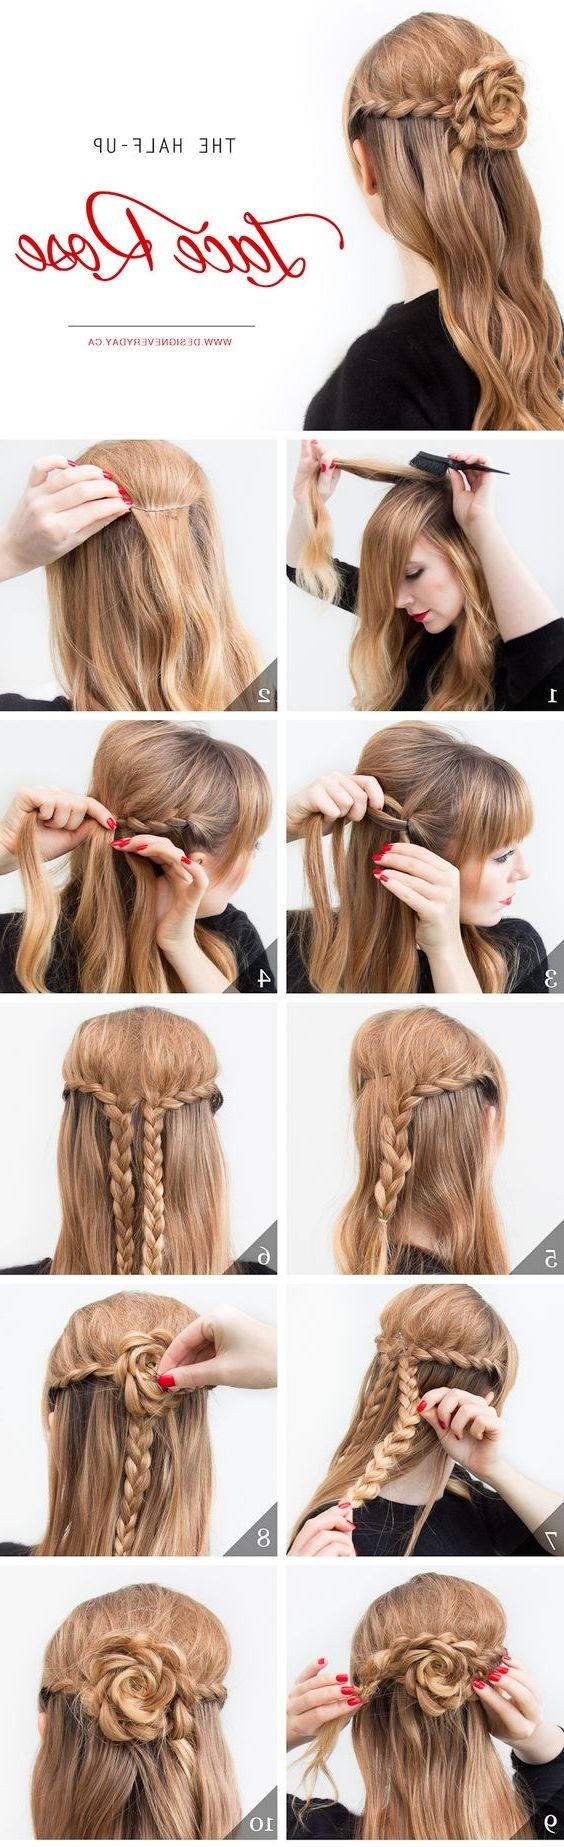 Super Easy Diy Braided Hairstyles For Wedding Tutorials (View 11 of 15)